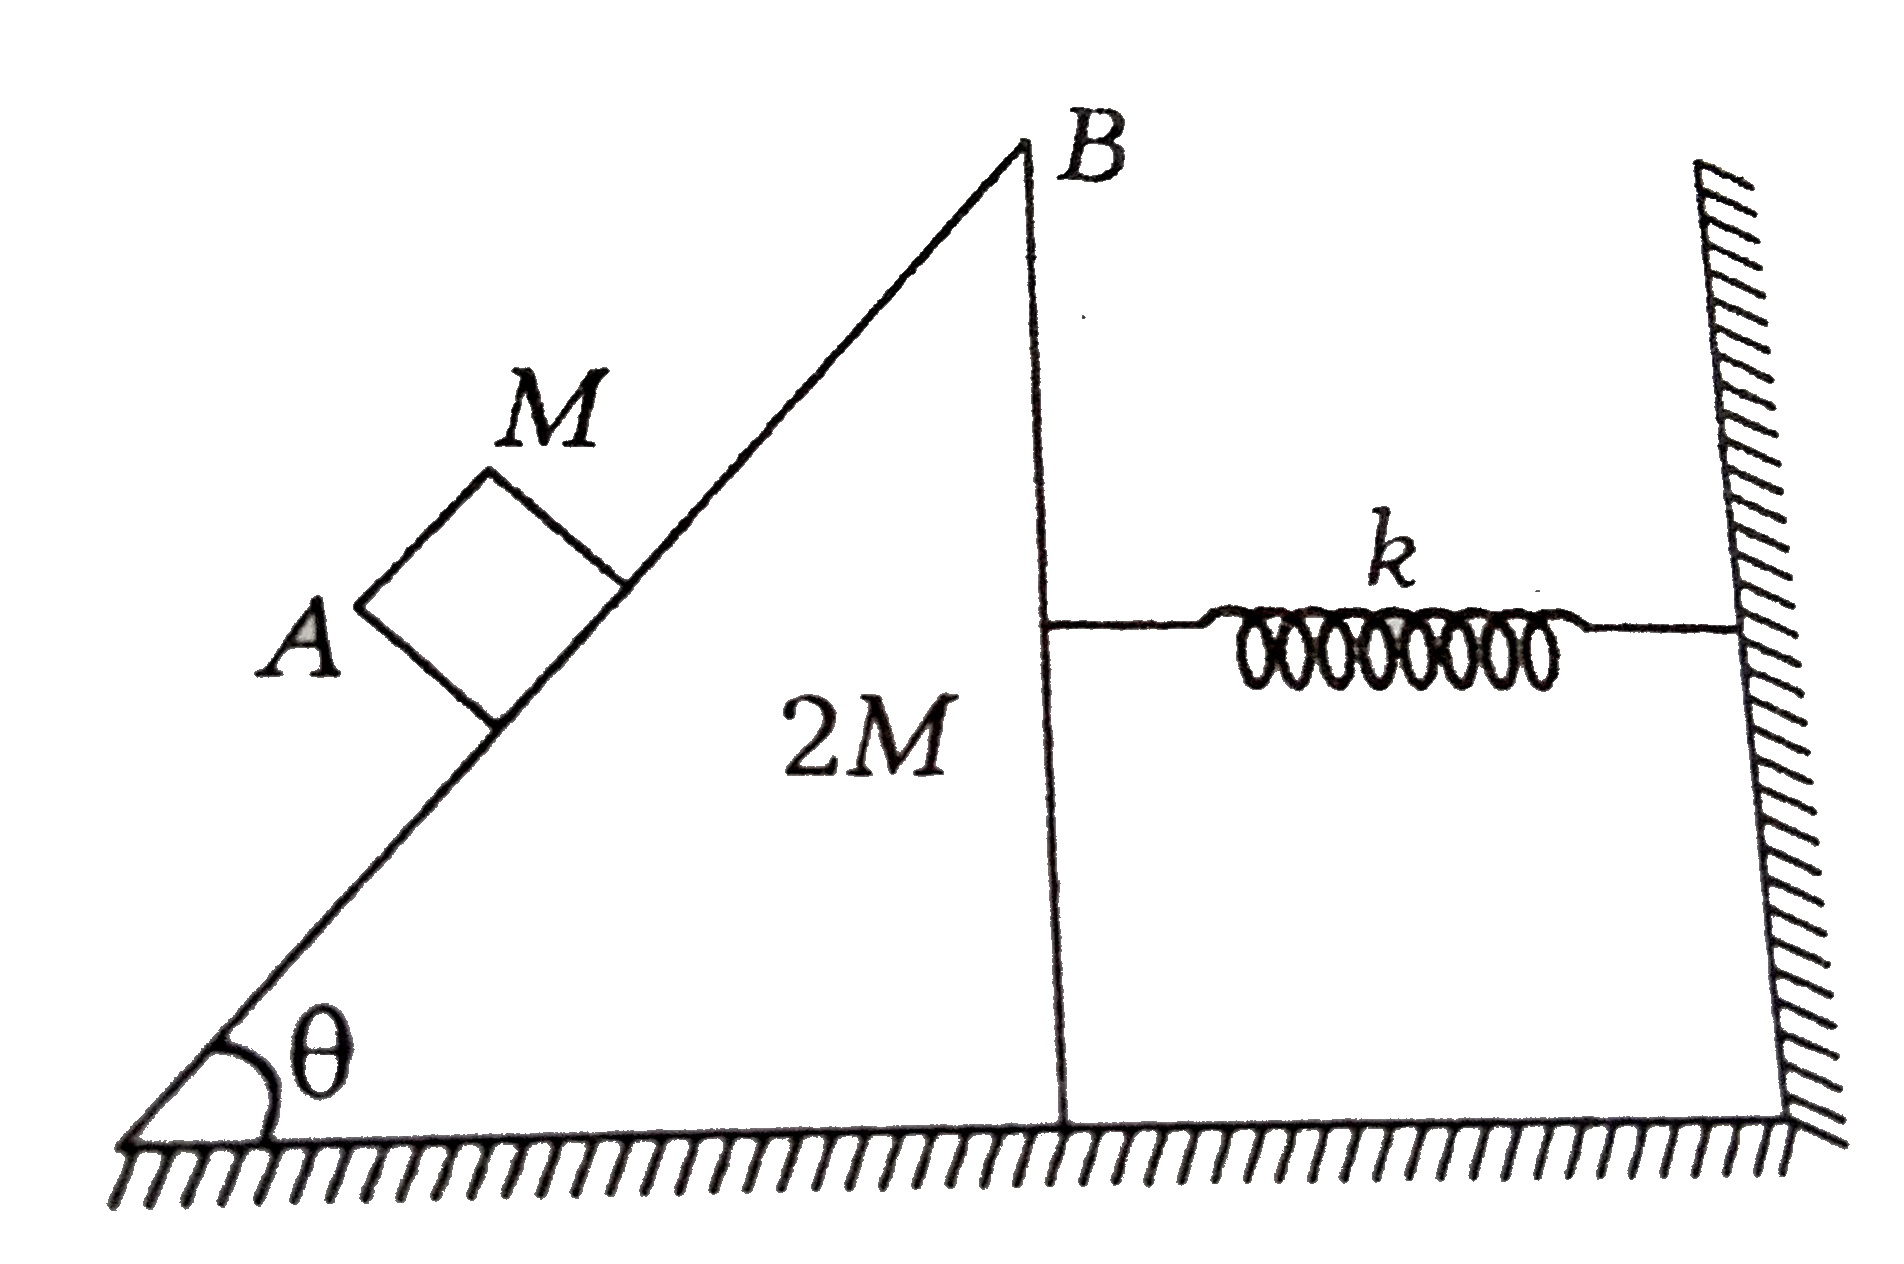 A block A of mass M rests on a wedge B of mass 2M and inclination theta. There is sufficient friction between A and B so that A does not slip on B. If there is no friction between B and ground, the compression in spring is